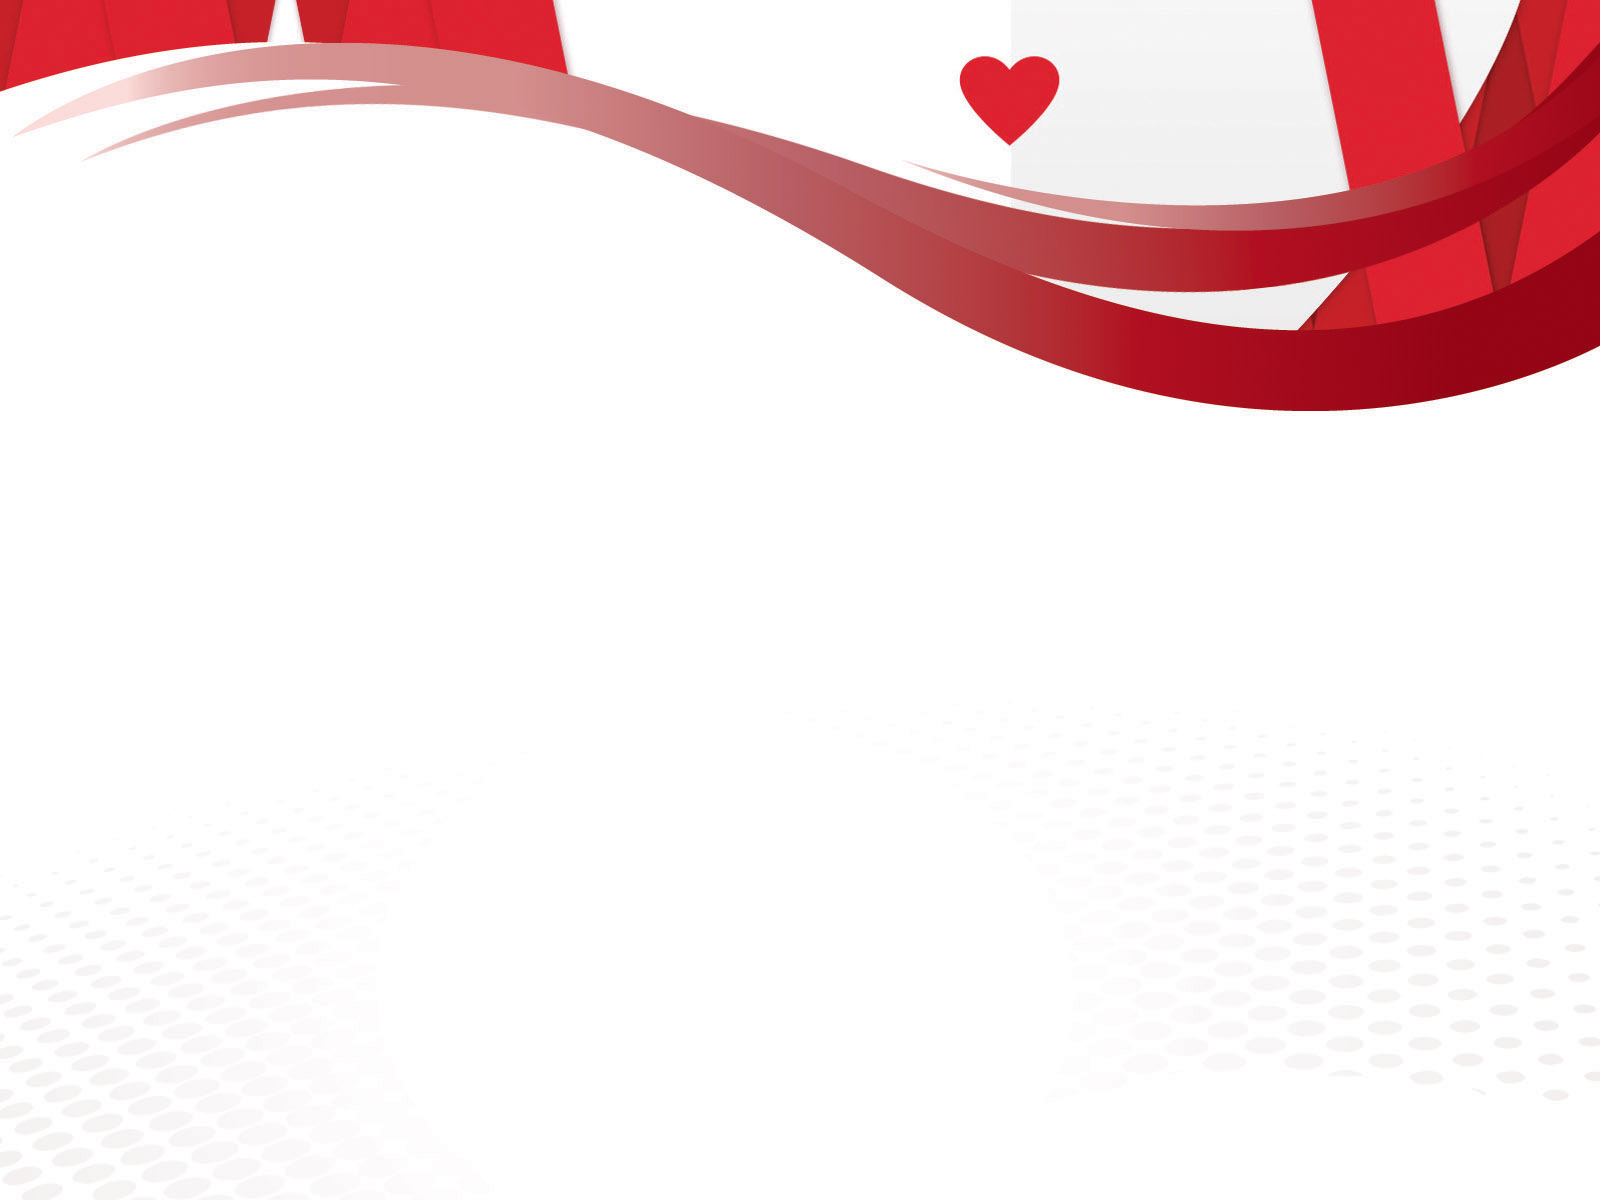 Symbol of Heart Powerpoint Templates - 3D Graphics, Love, Red - Free PPT  Backgrounds and Templates